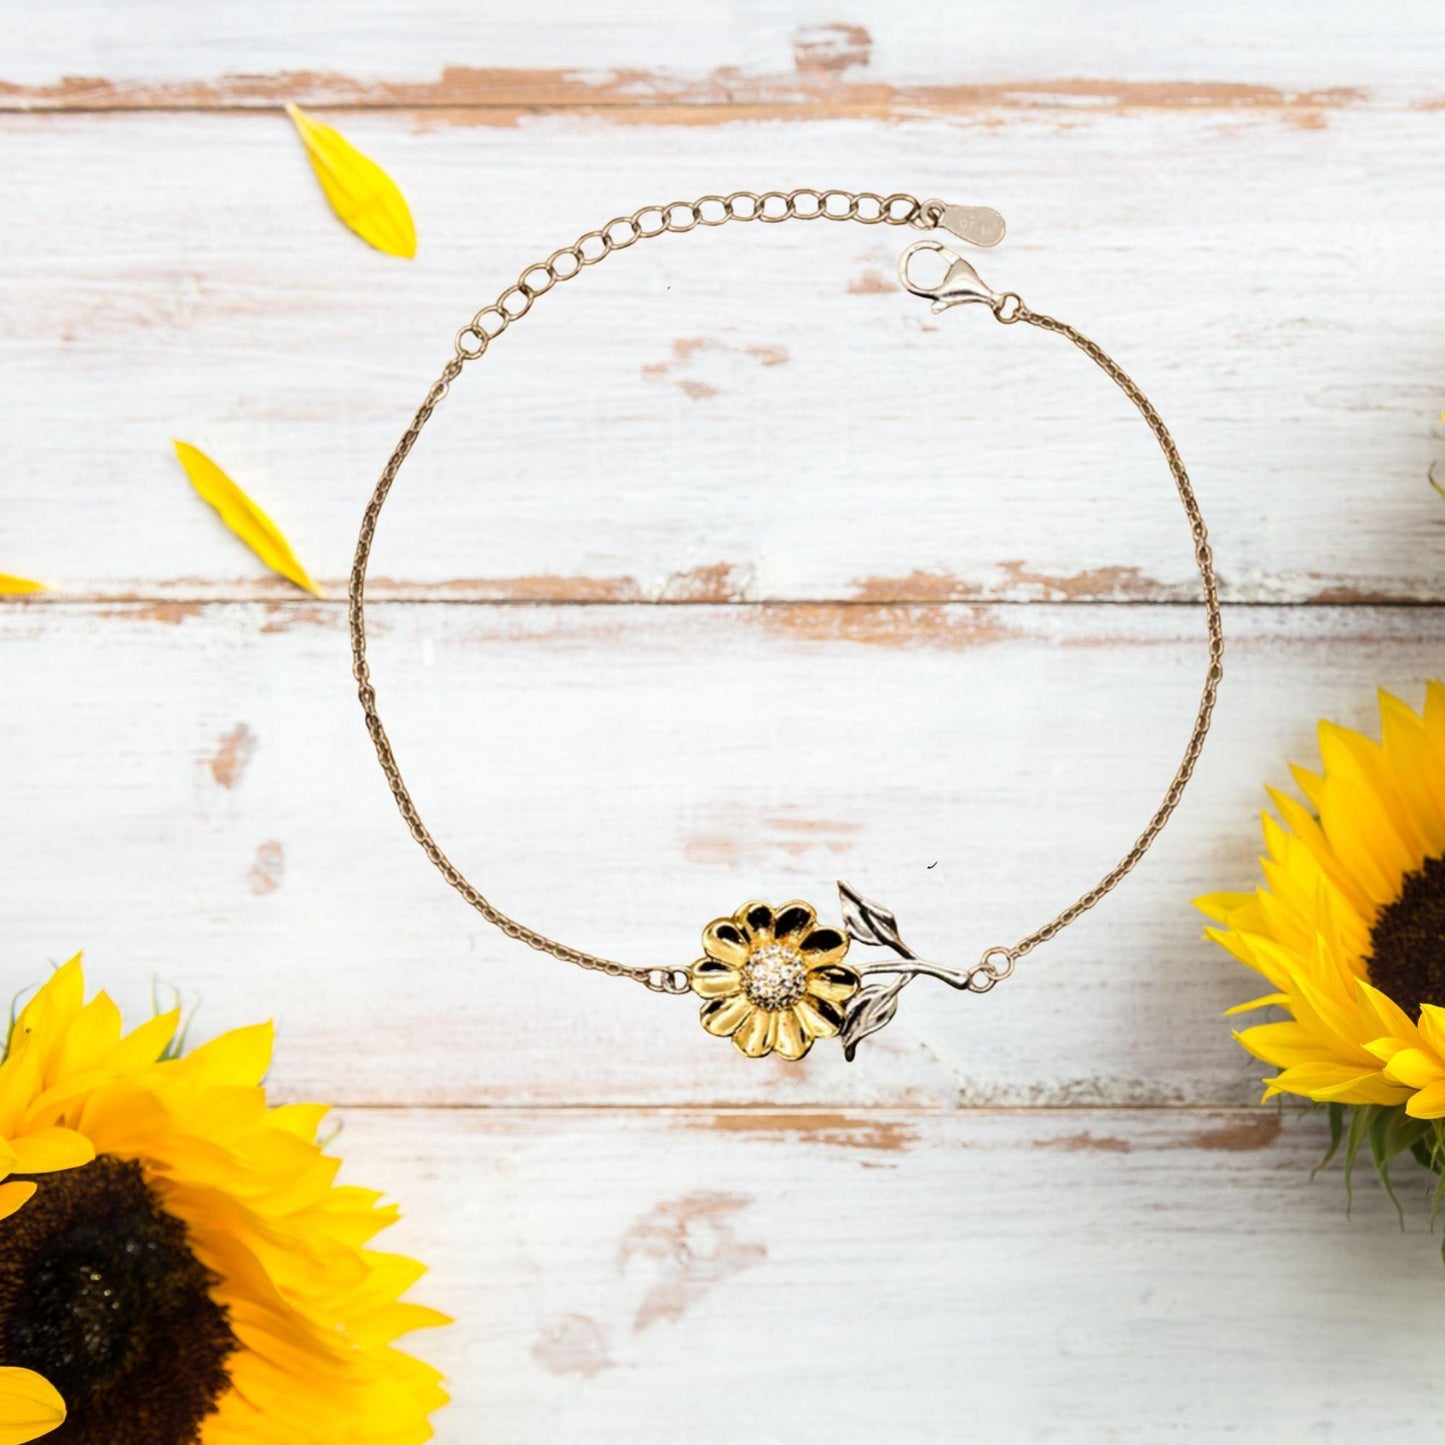 To My Wife I Want to Be Your Last Everything Sunflower Bracelet Romantic Valentine Gift - Mallard Moon Gift Shop